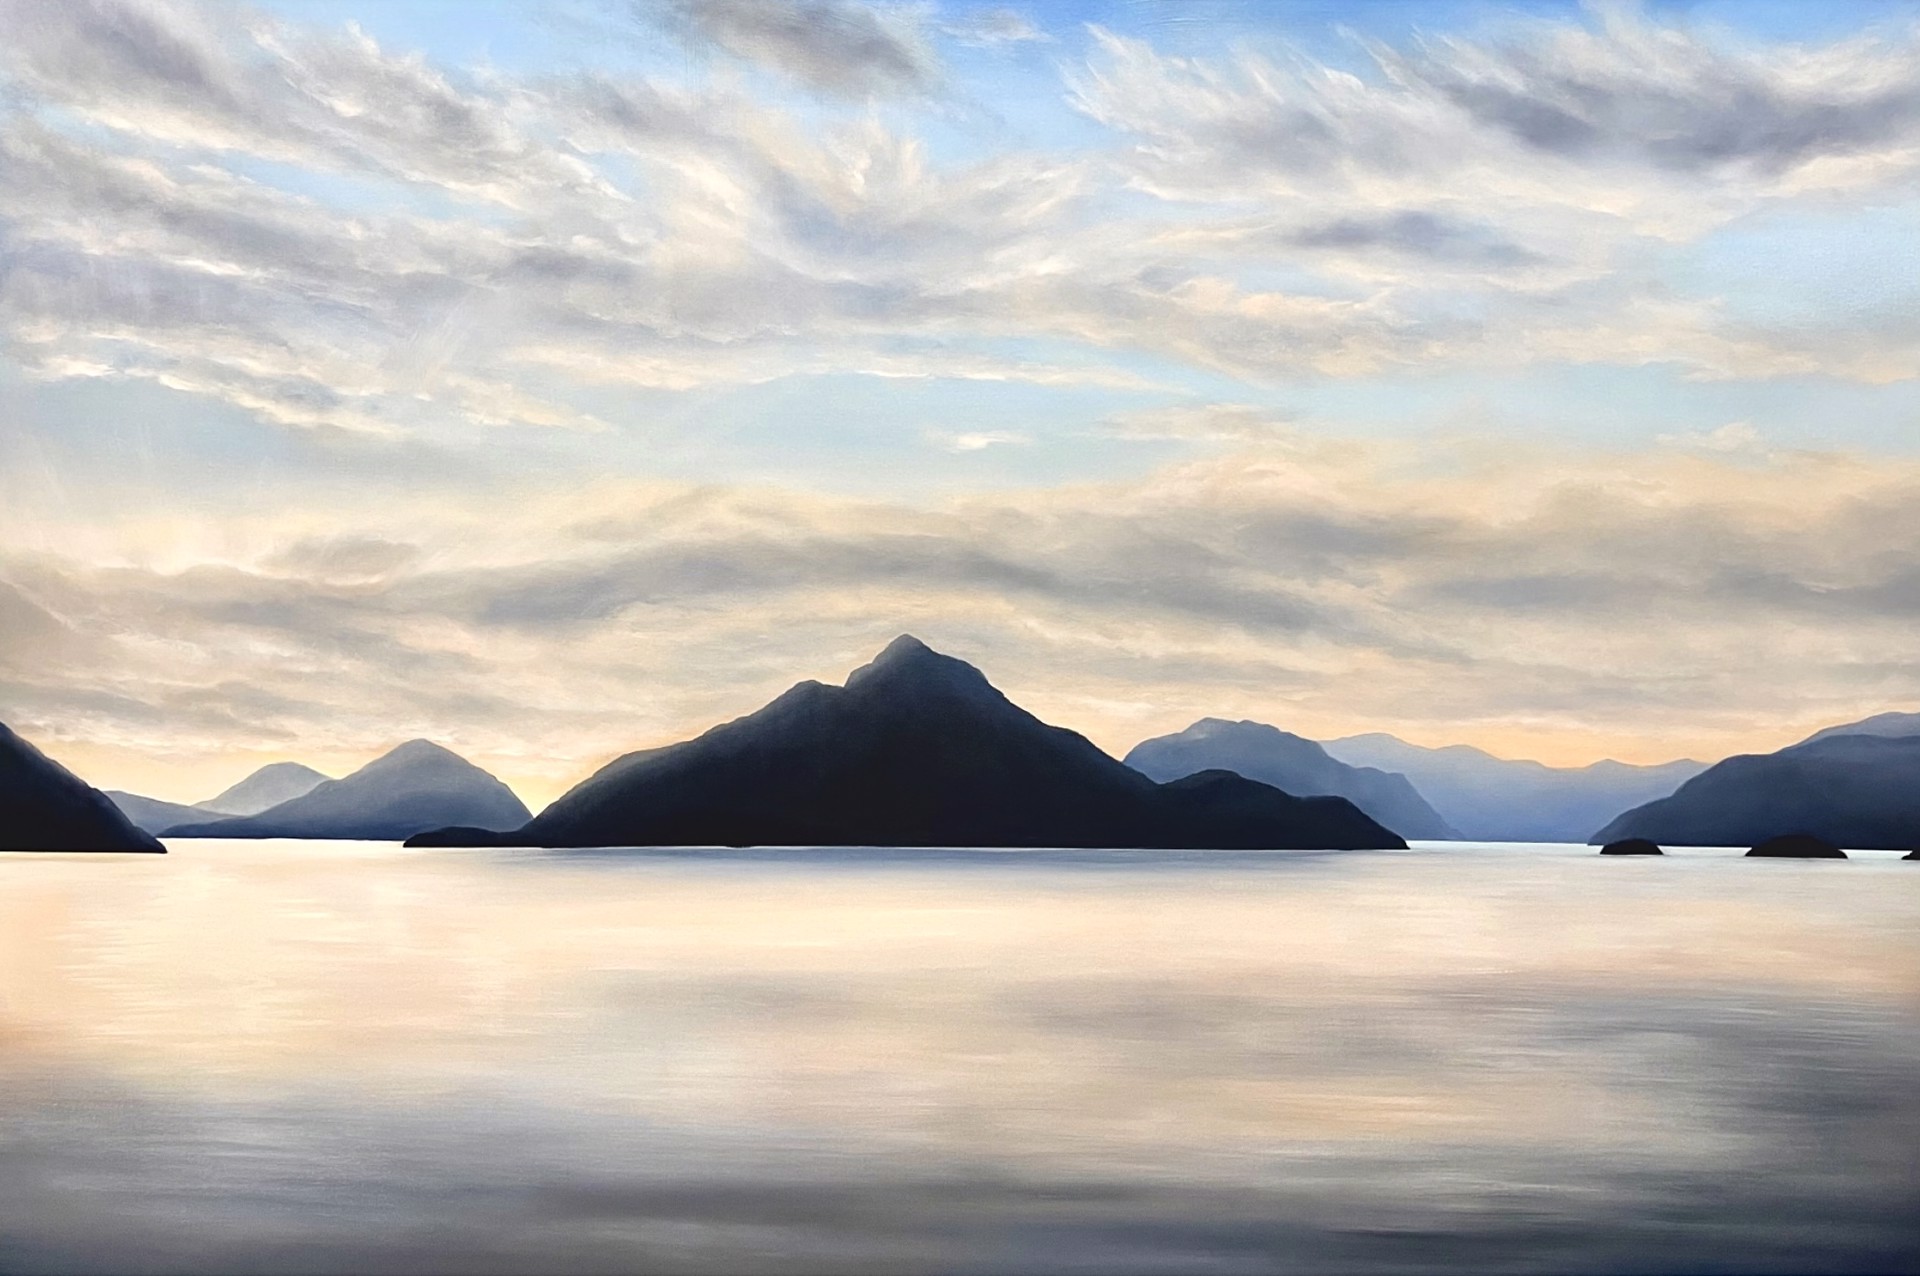 Porteau Cove - There Ain't No Place Like You - Commission by Corrinne Wolcoski